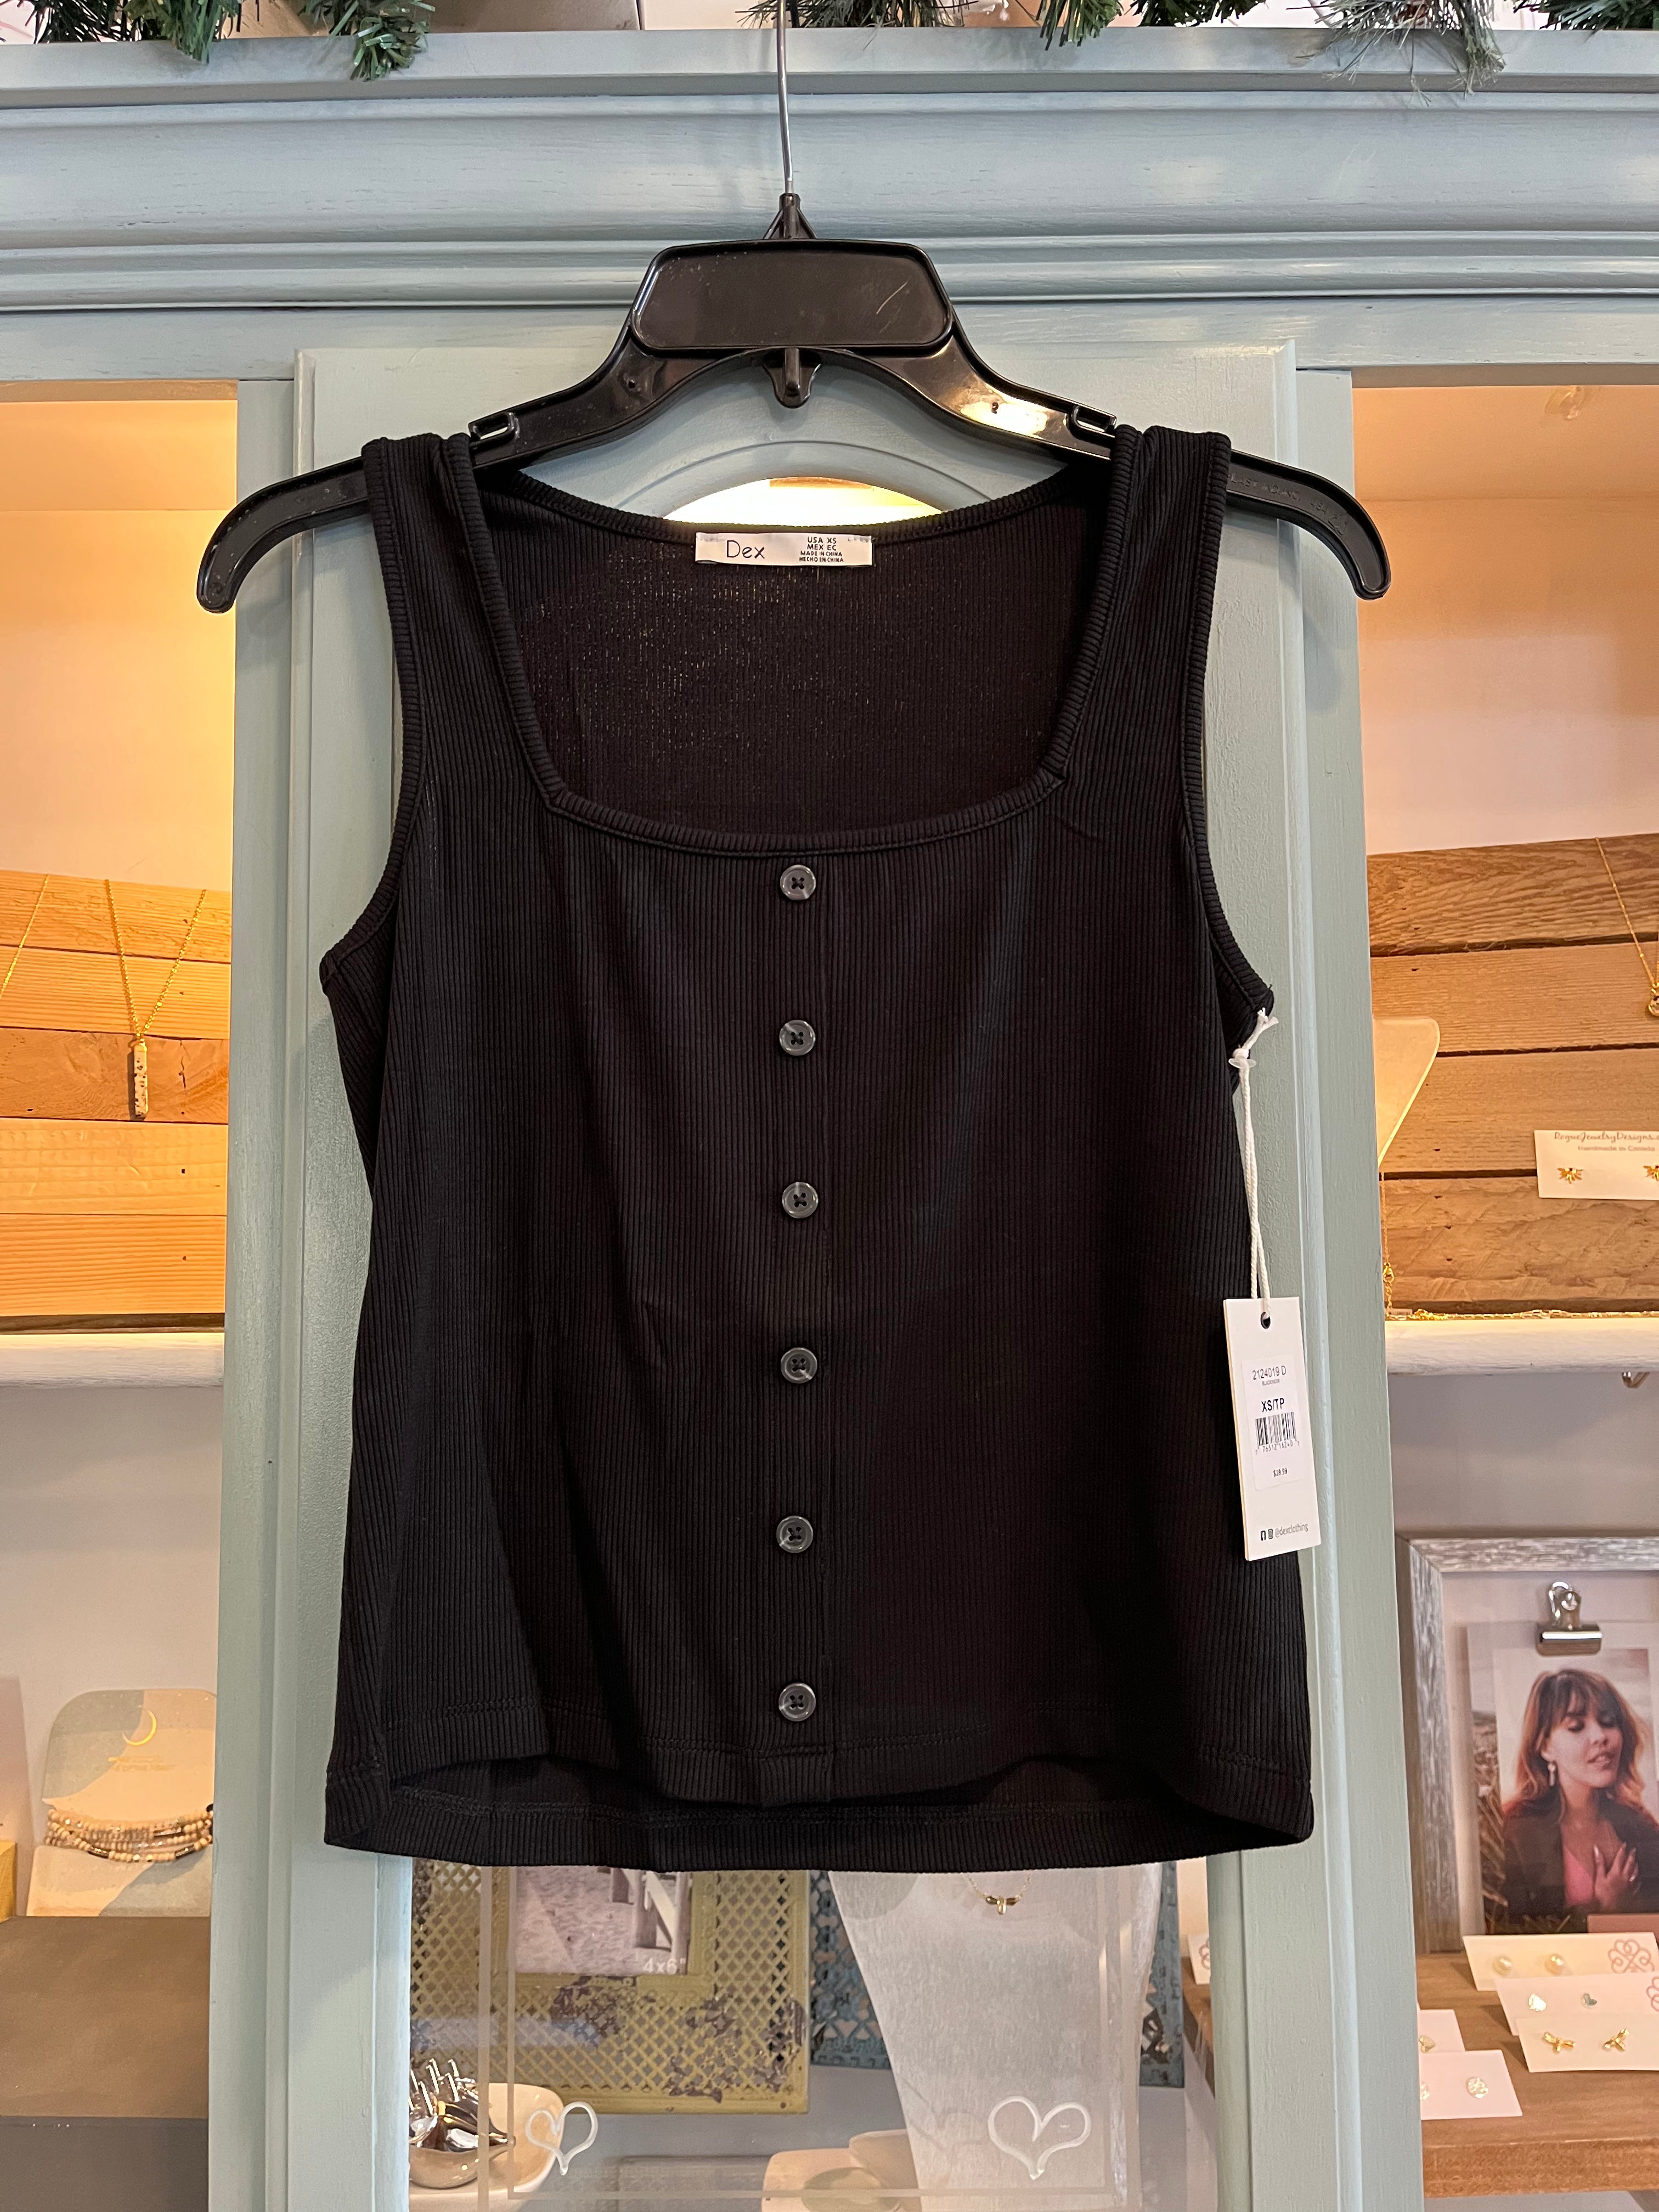 Button Front Tank Top